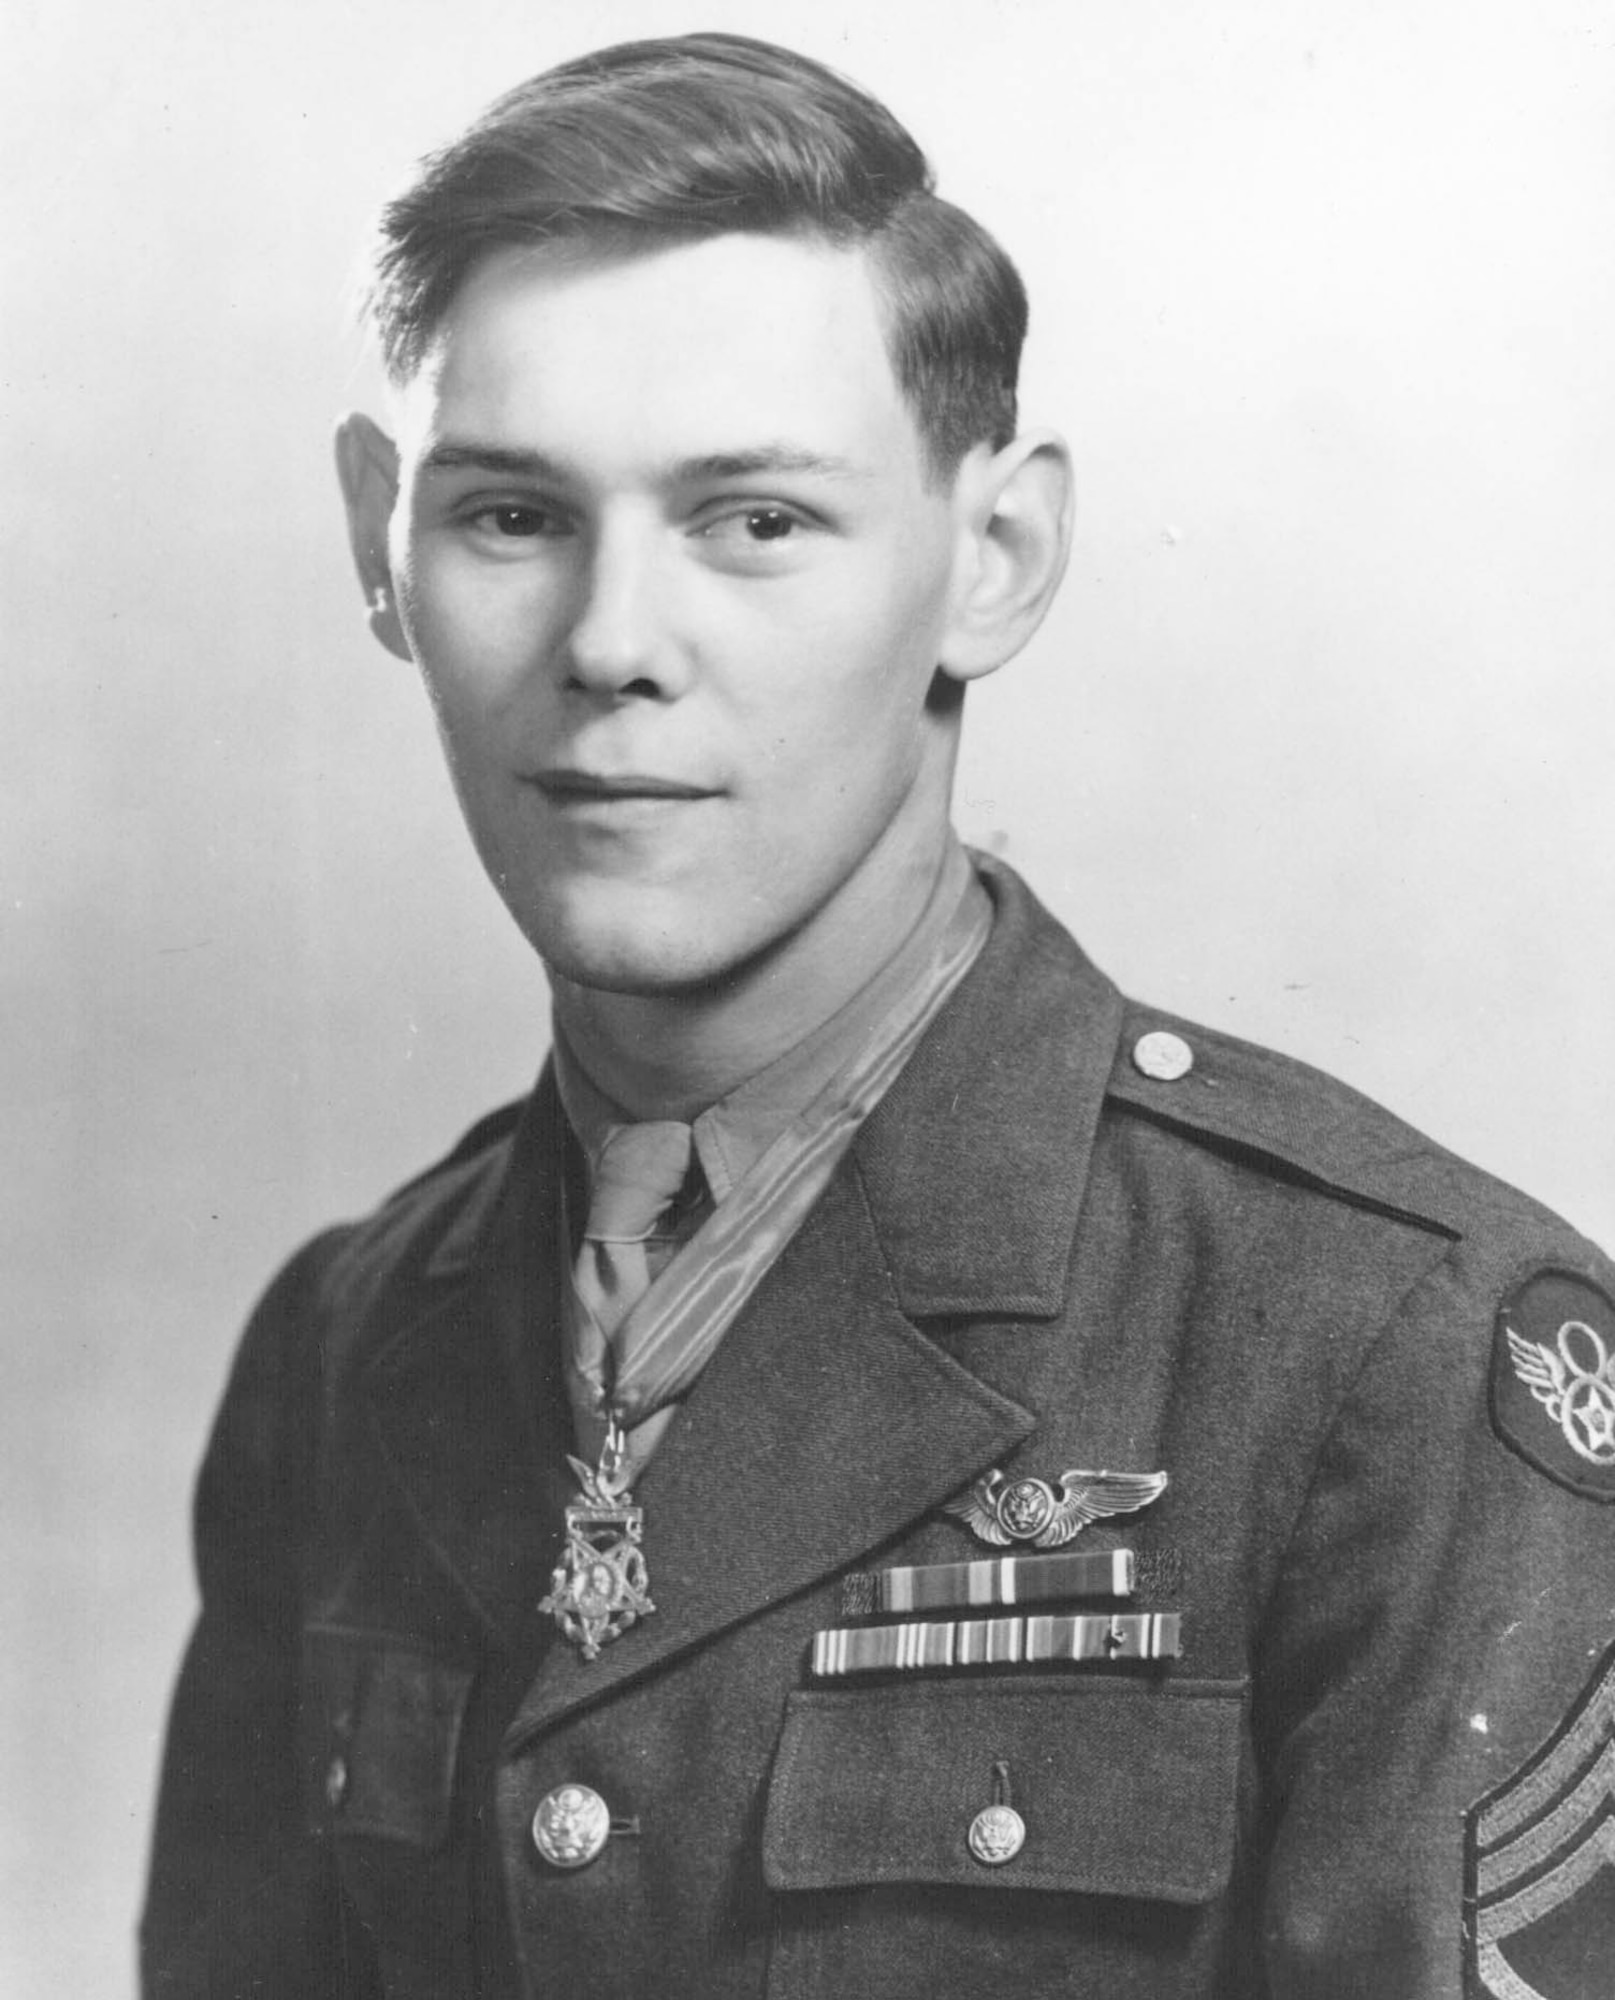 Medal of Honor recipient, WWII